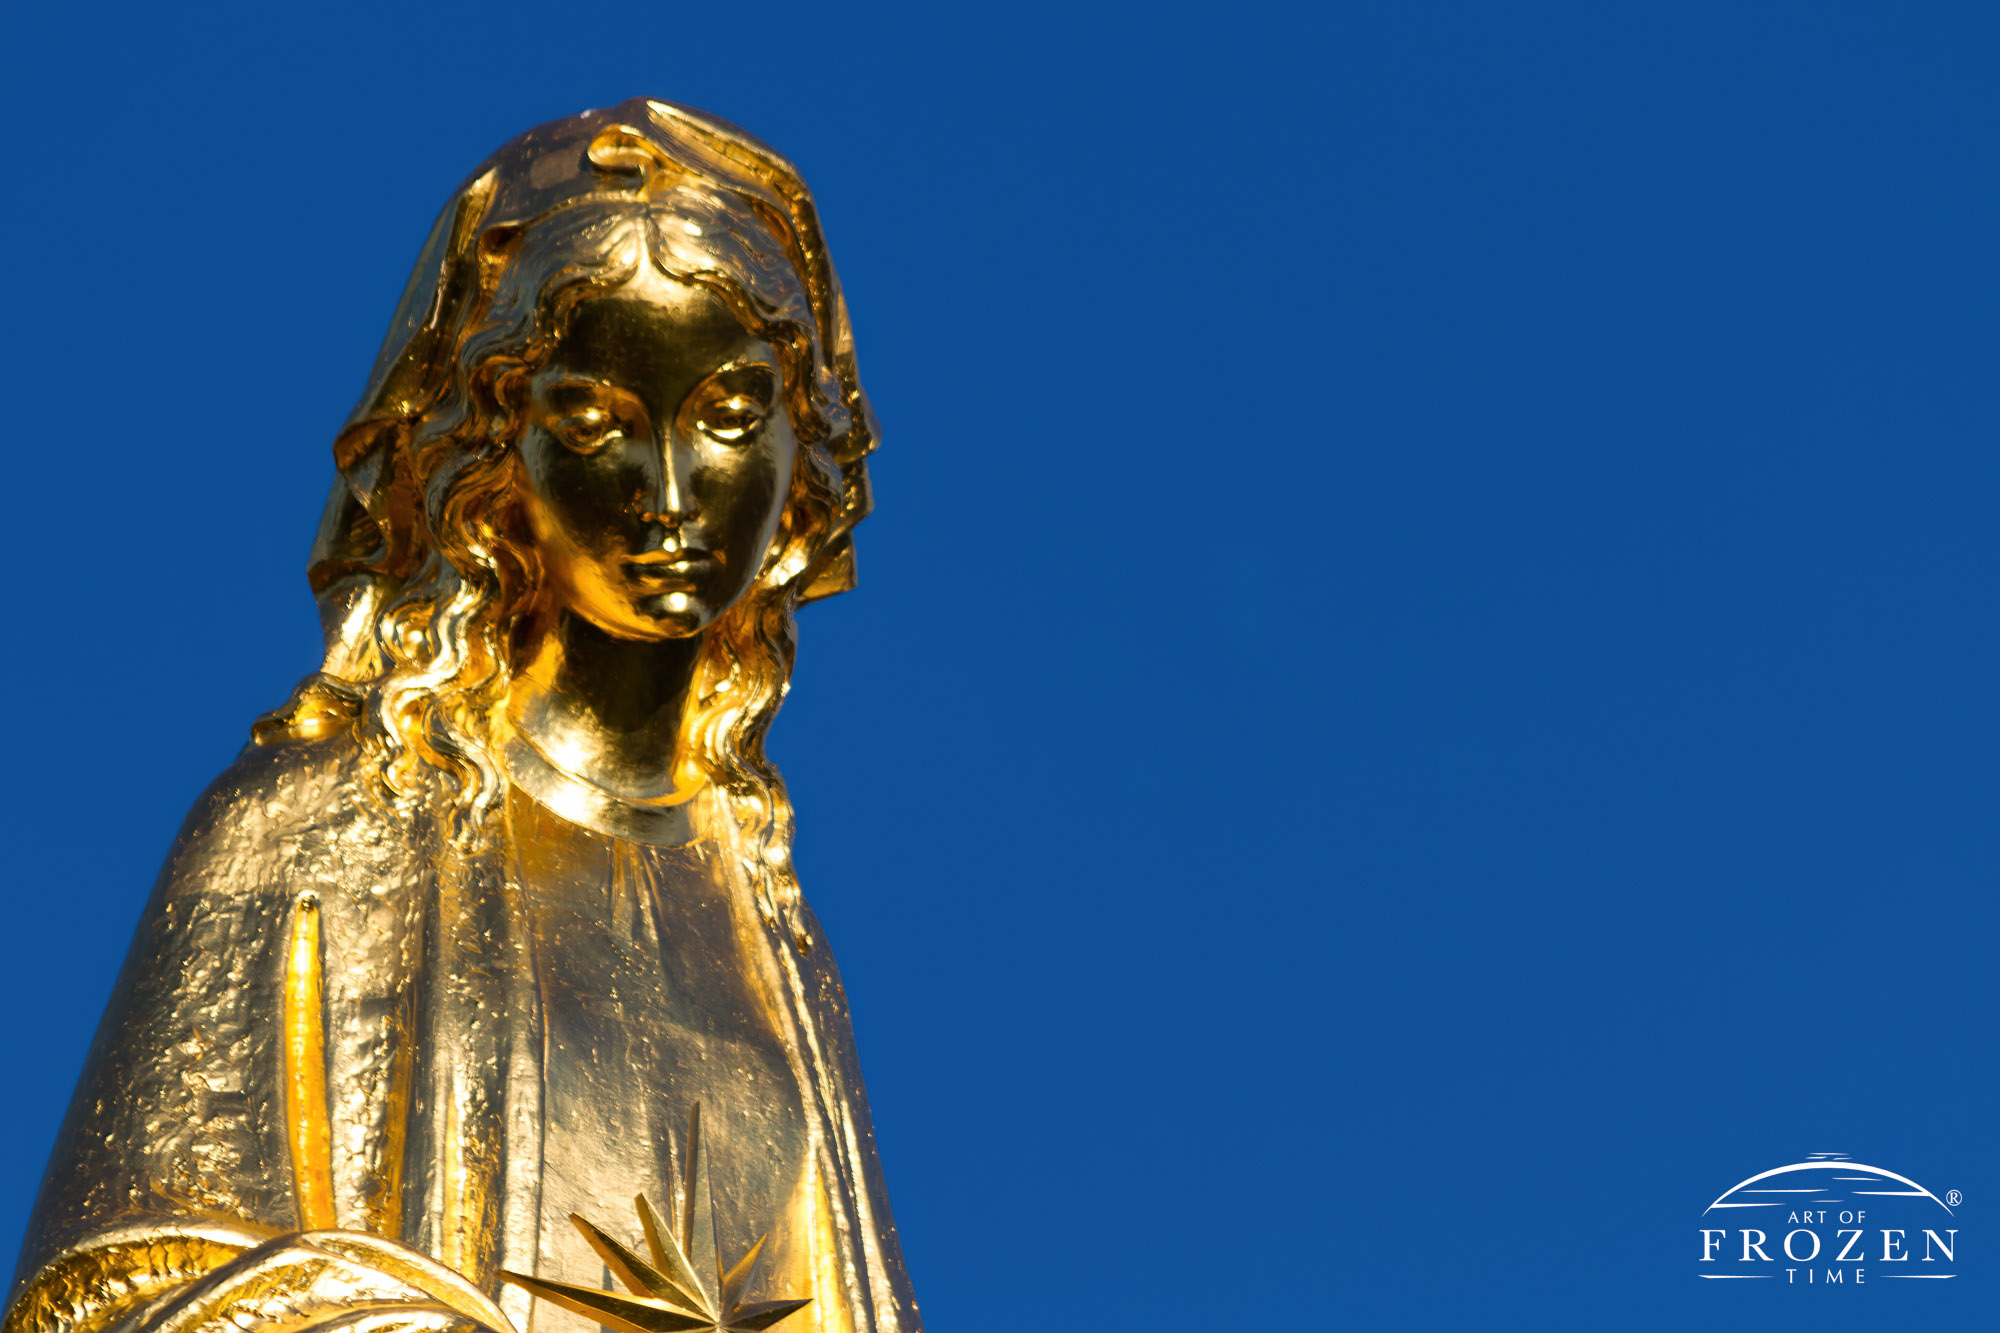 A golden embossed statue of the Virgin Mary on top the steeple of Our Lady of the Lake Catholic Church on a clear blue day